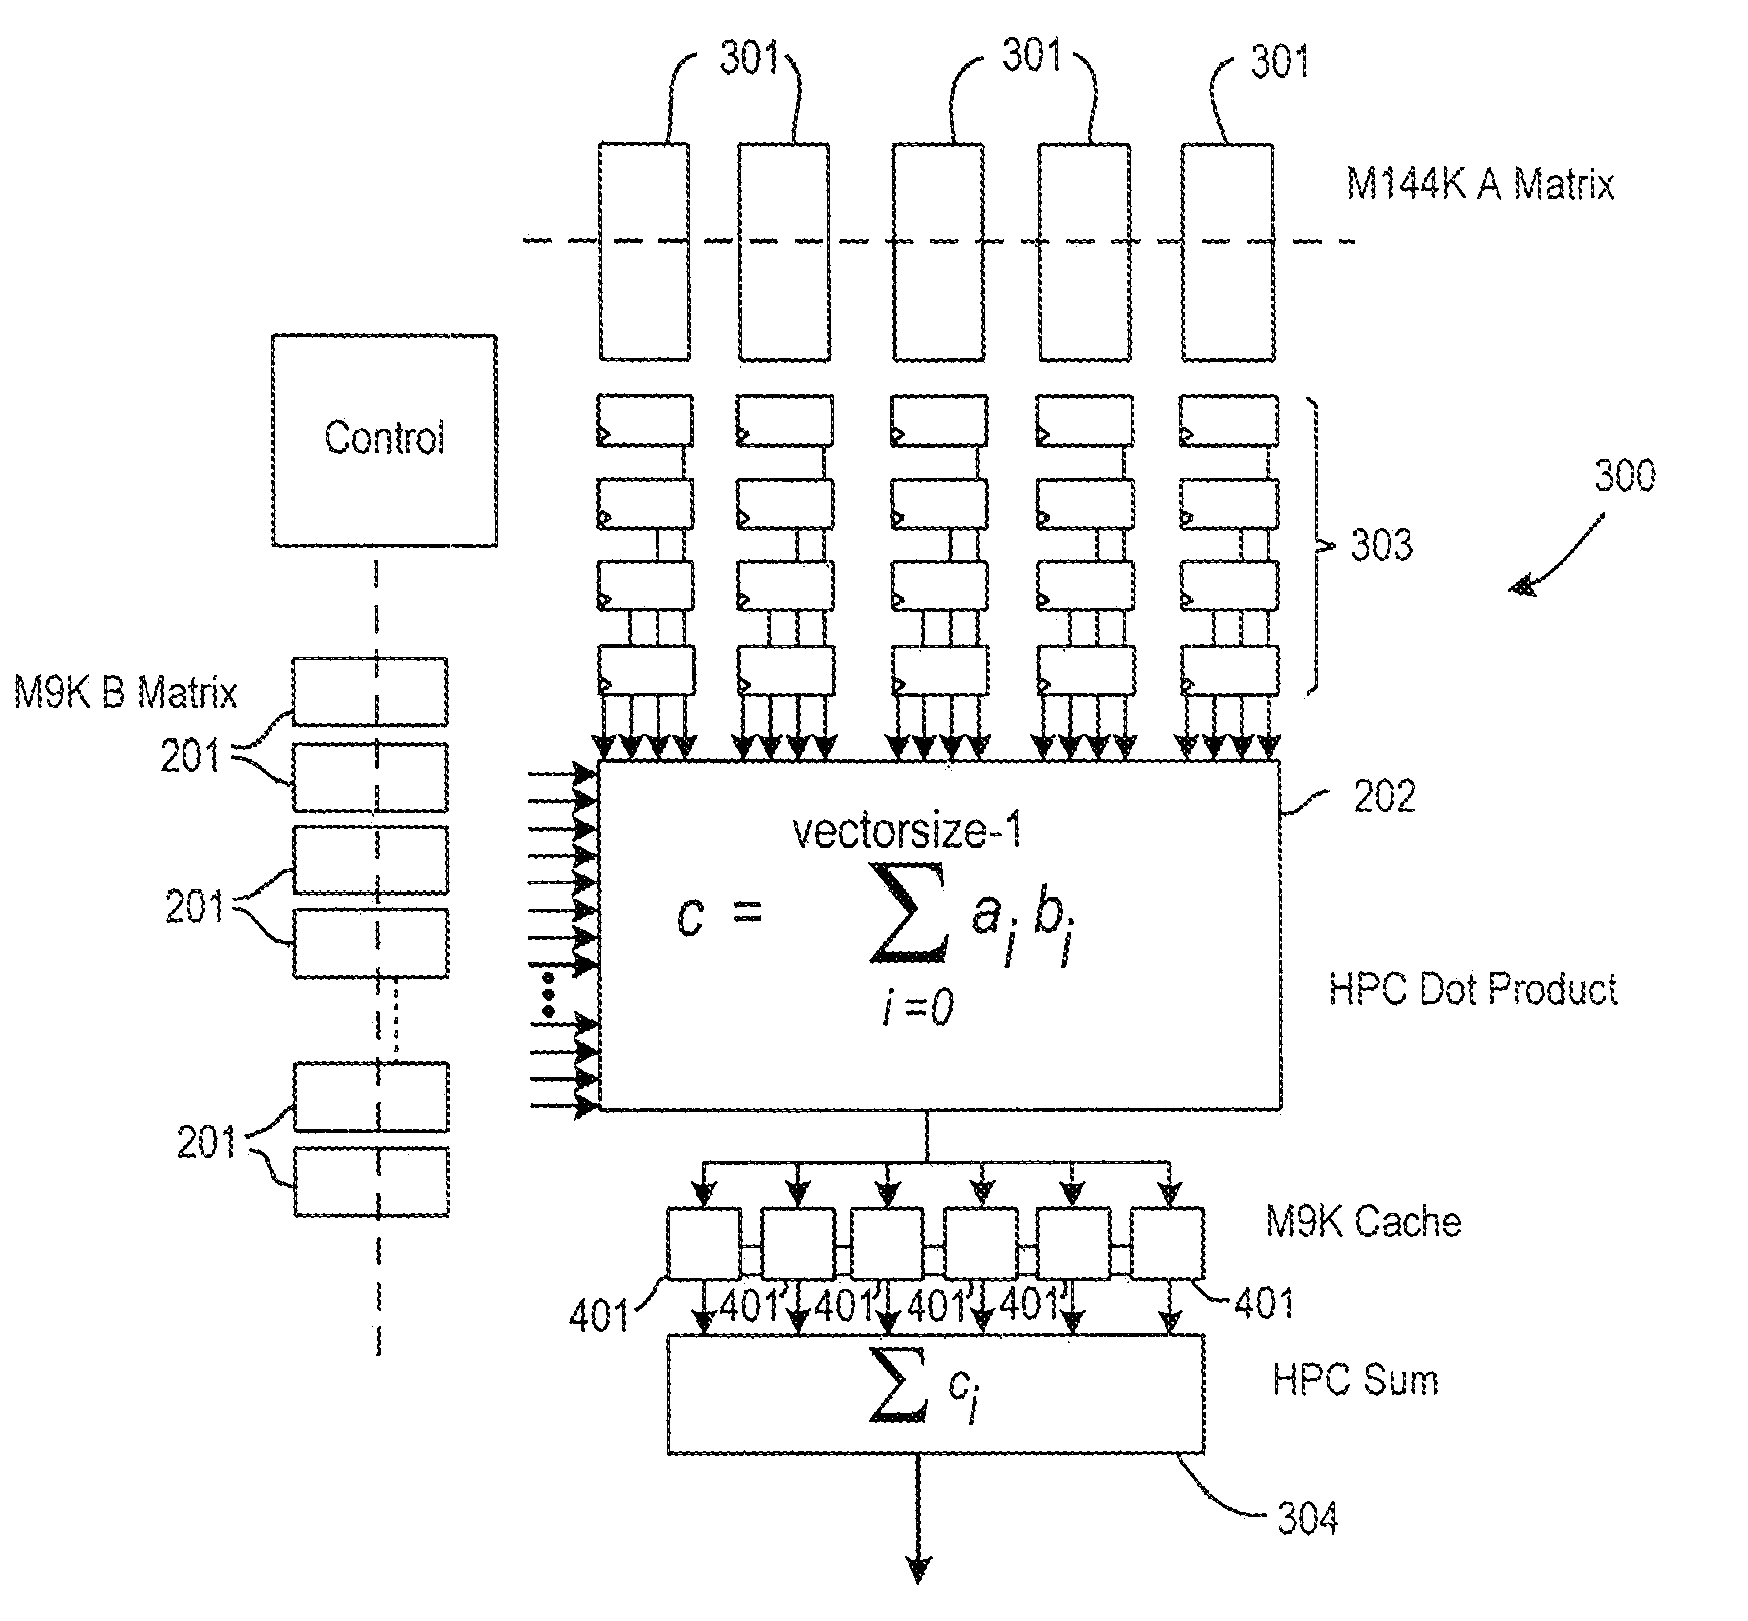 Configuring a programmable integrated circuit device to perform matrix multiplication